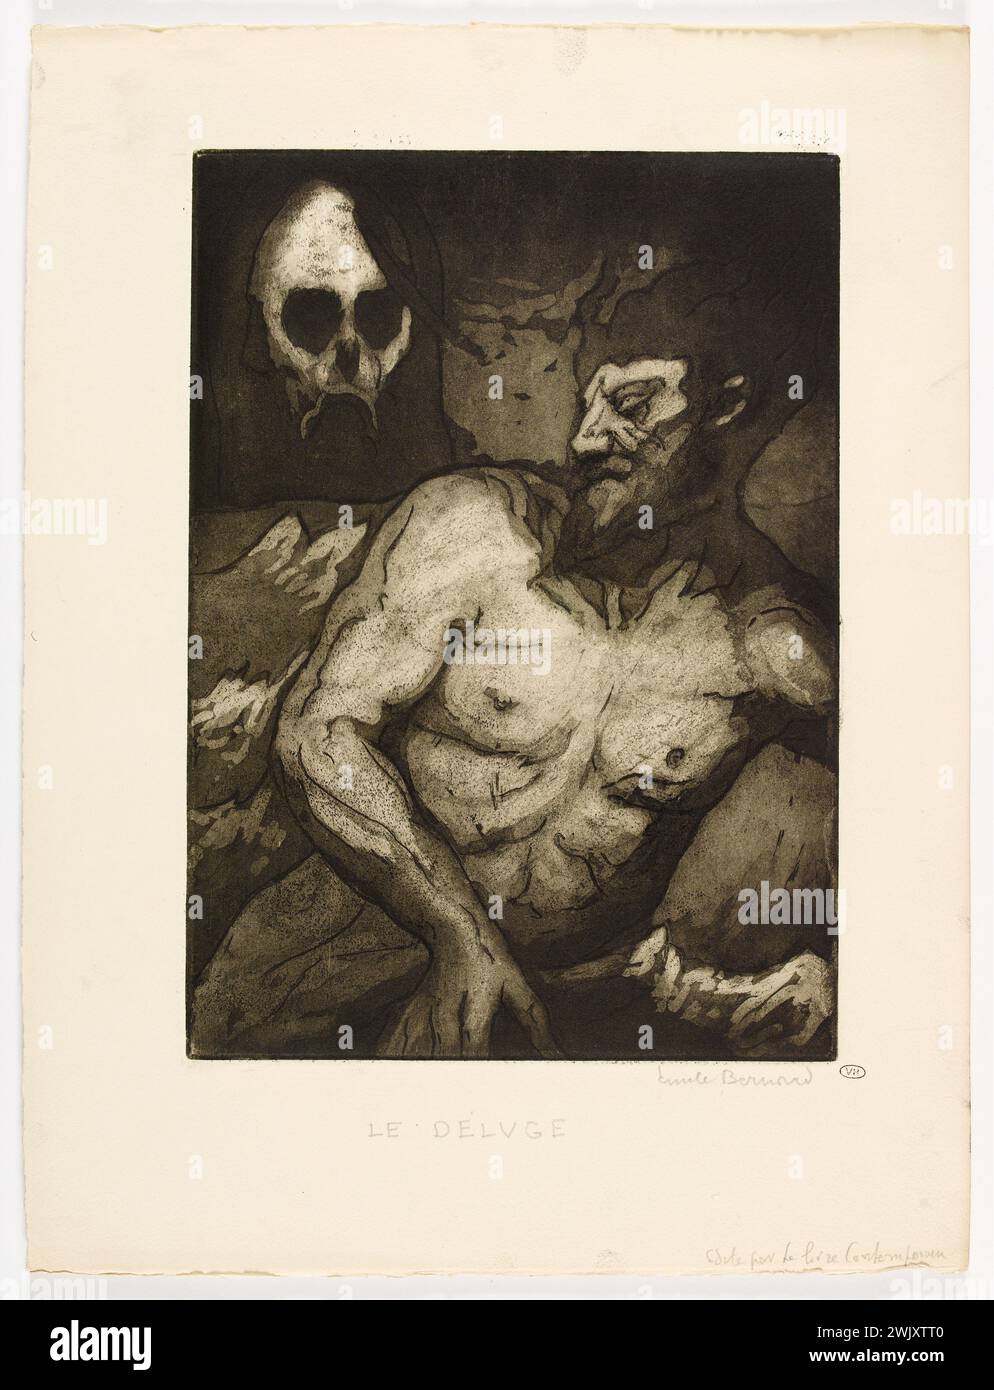 Emile Bernard (1868-1941). 'The end of Satan. The flood'. Etching and aquatint. 1935. Paris, house of Victor Hugo. 101108-5 Annies thirty 1930 30, aquatinte, drawing, etching, illustration, literary work, character, death head Stock Photo